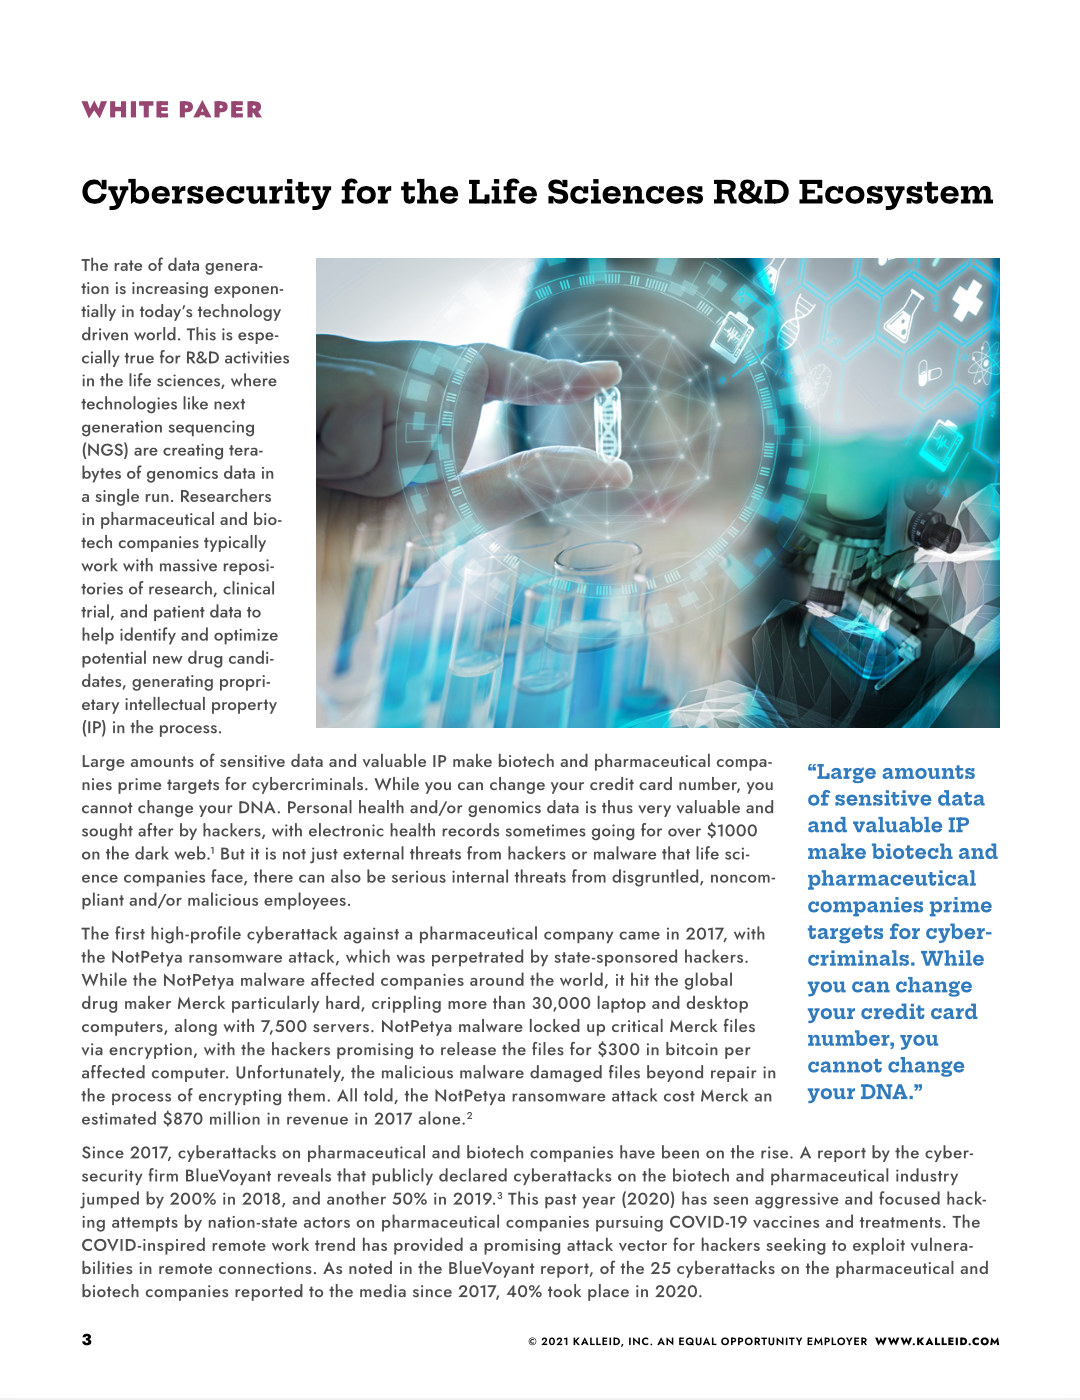 Cybersecurity for the Life Sciences R&D Ecosystem